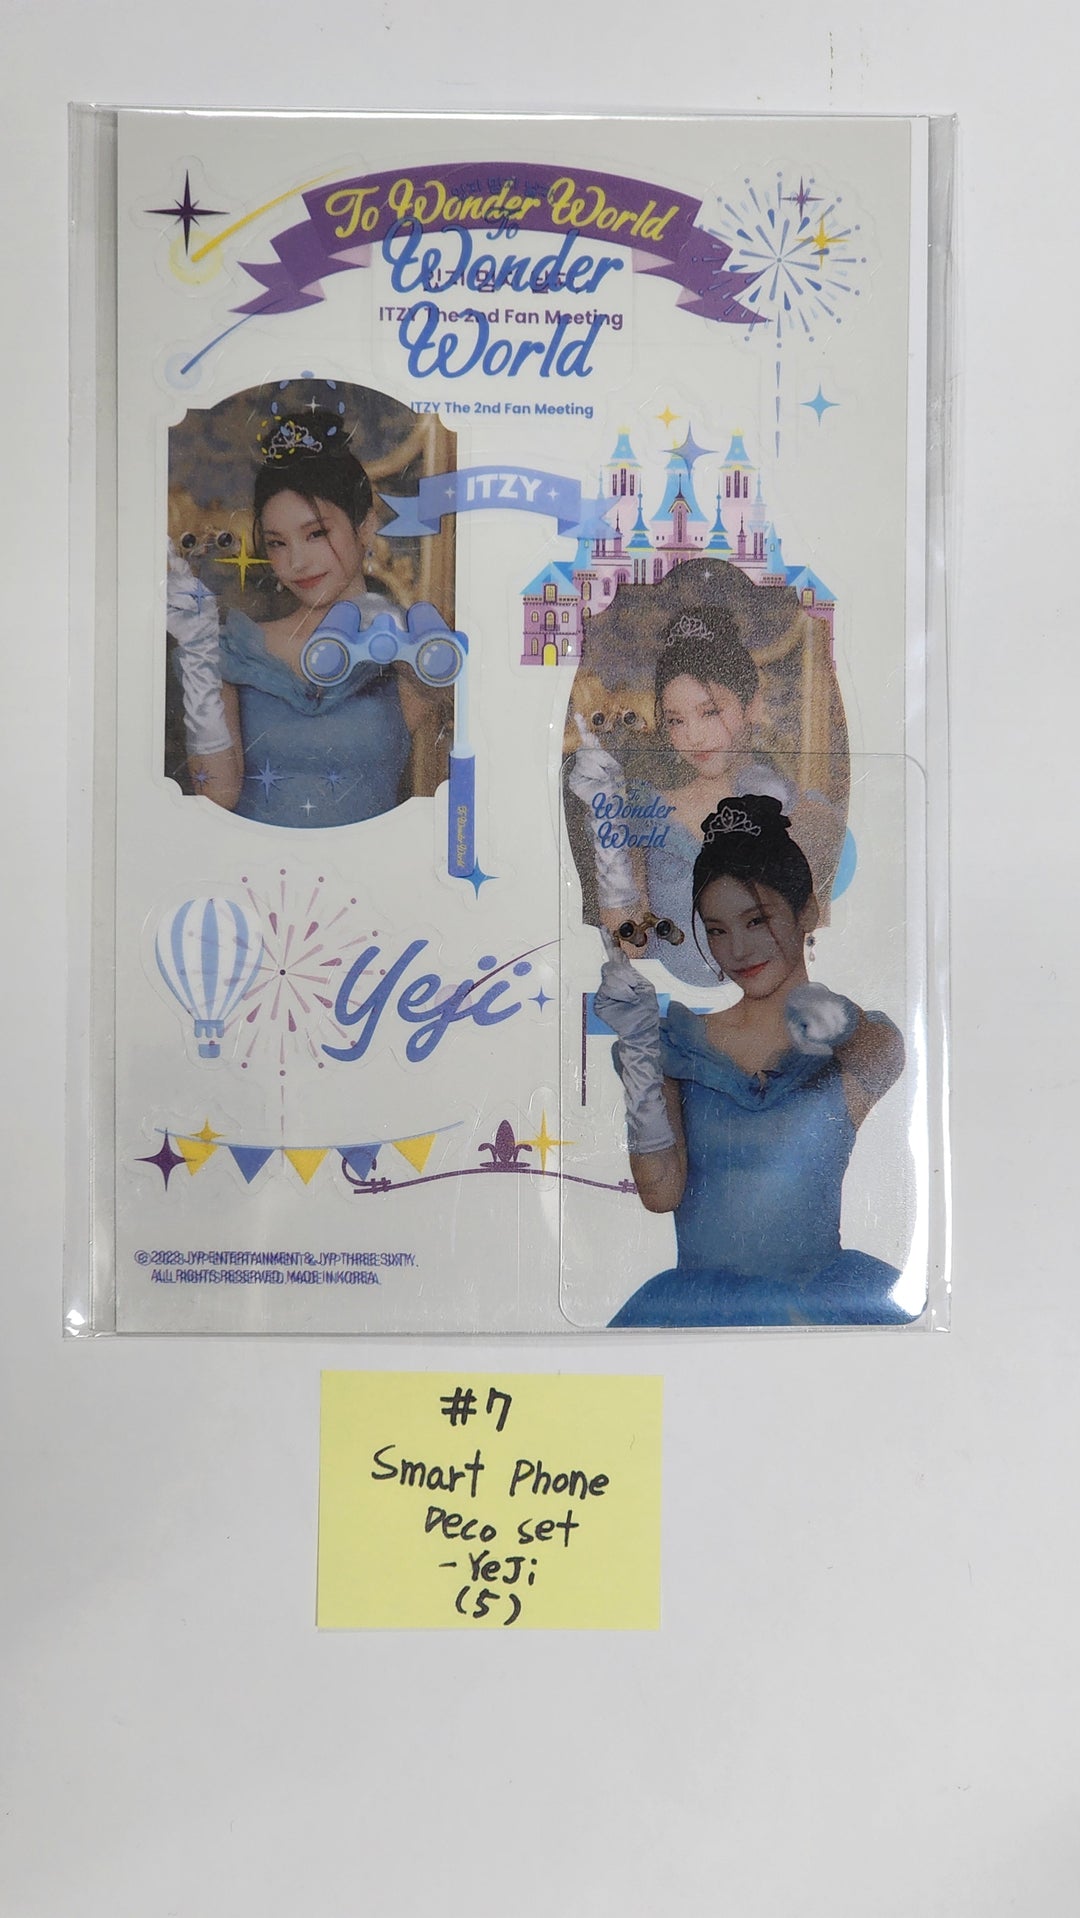 ITZY "Wonder World" The 2nd Fan Meeting - Official MD [Wonder World Pass, Trading Photocard, Photocard Holder, Acrylic Kit]